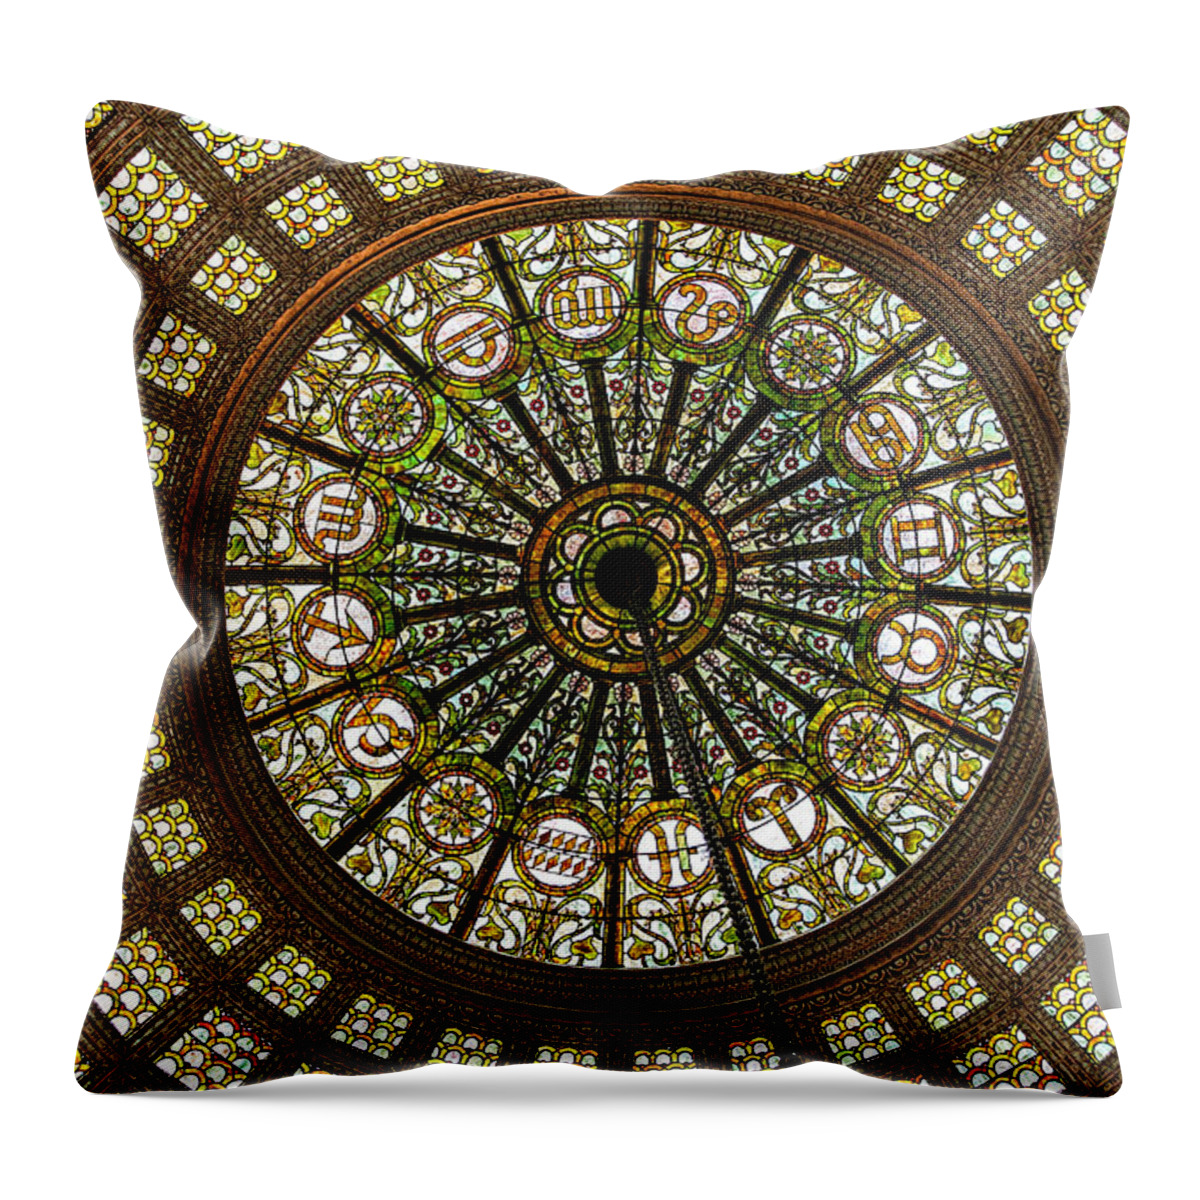 Tiffany Dome Throw Pillow featuring the photograph Tiffany Dome Chicago Cultural Museum by Eleanor Abramson